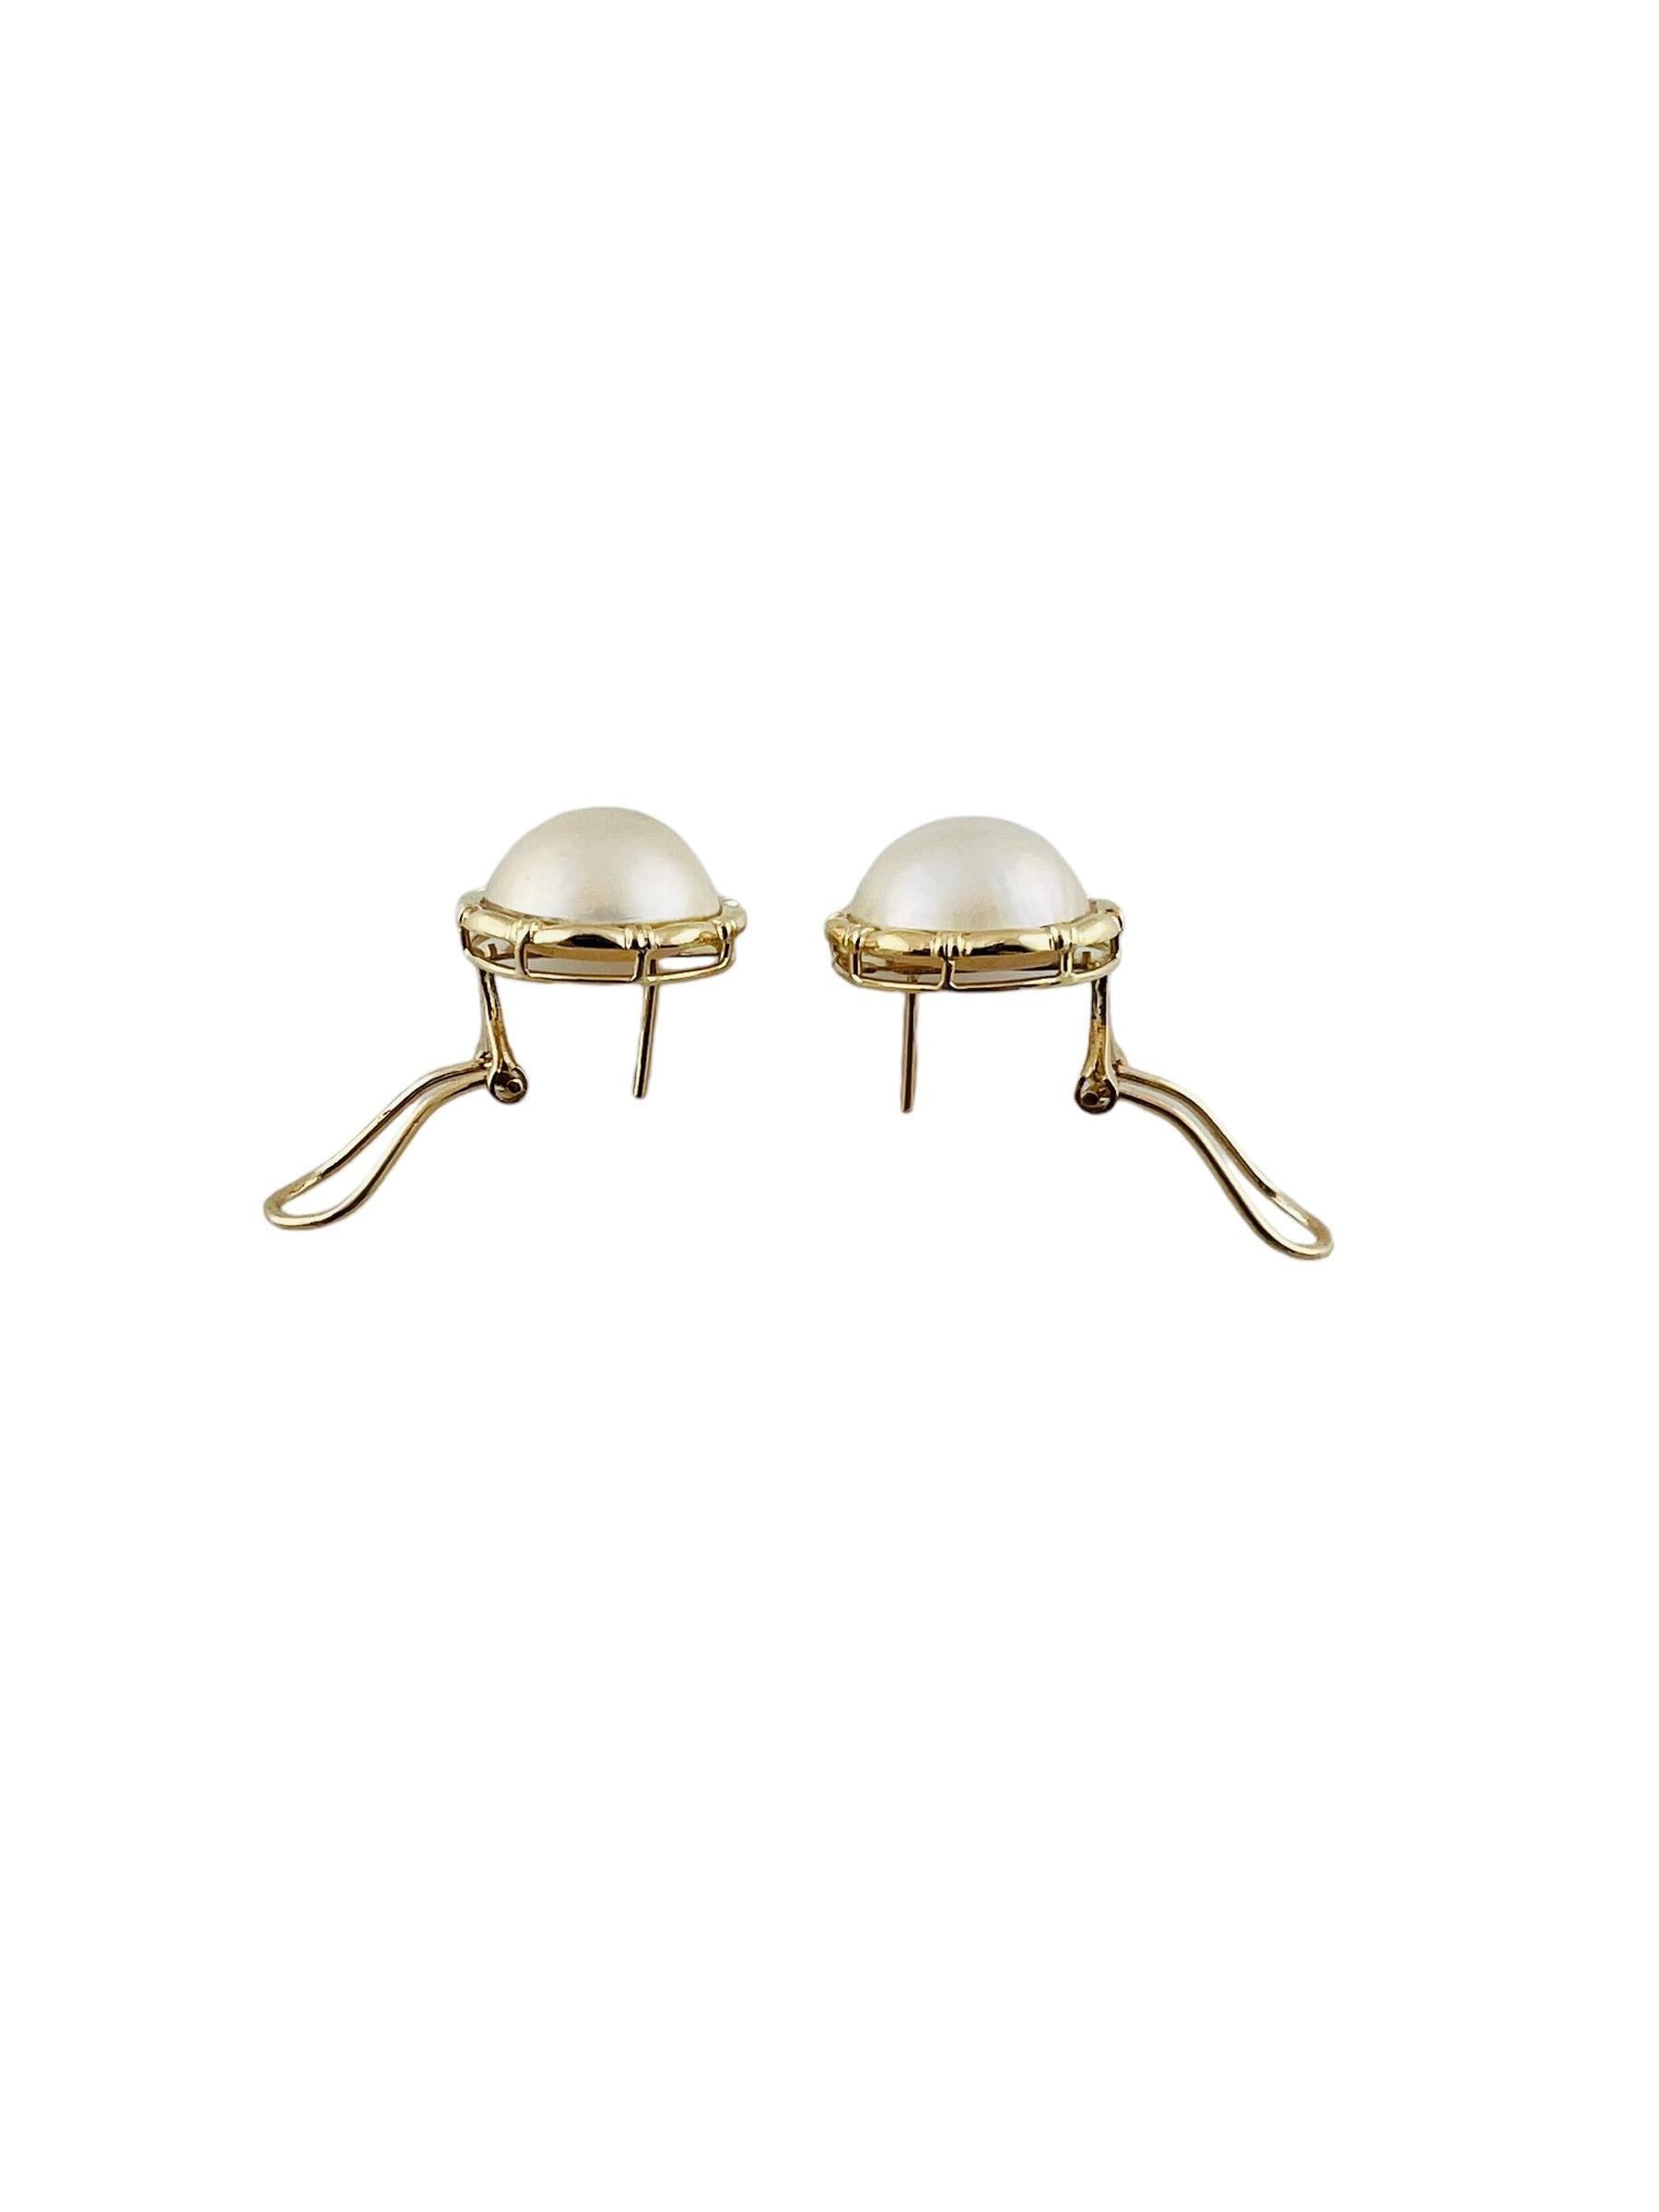 14K Yellow Gold Mabe Pearl Earrings #15940 For Sale 1